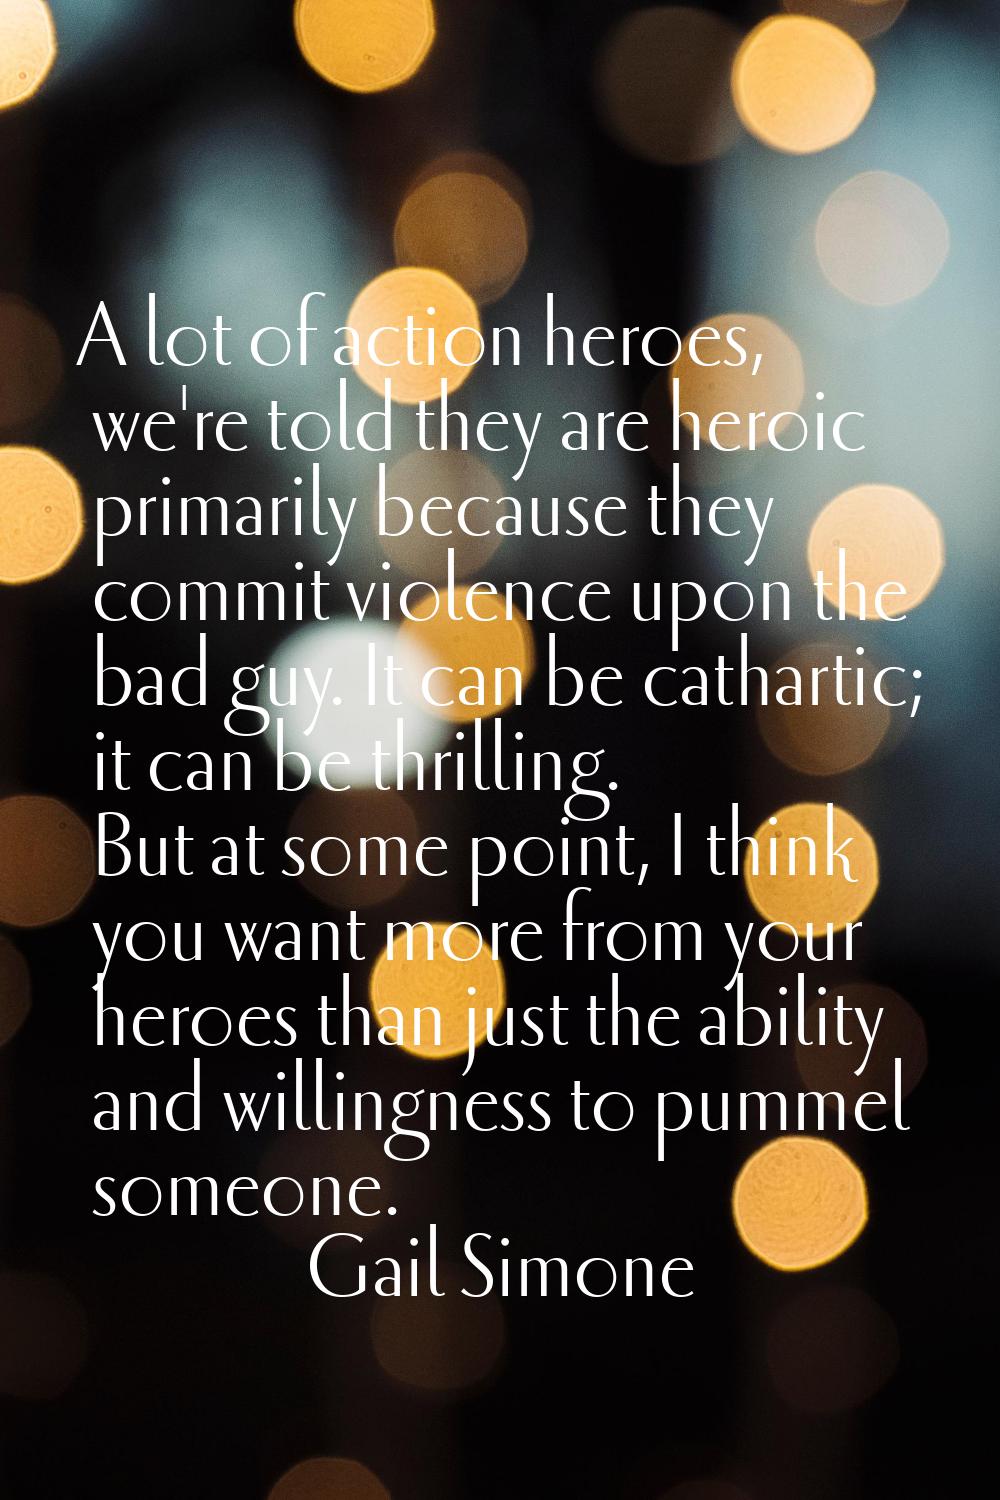 A lot of action heroes, we're told they are heroic primarily because they commit violence upon the 